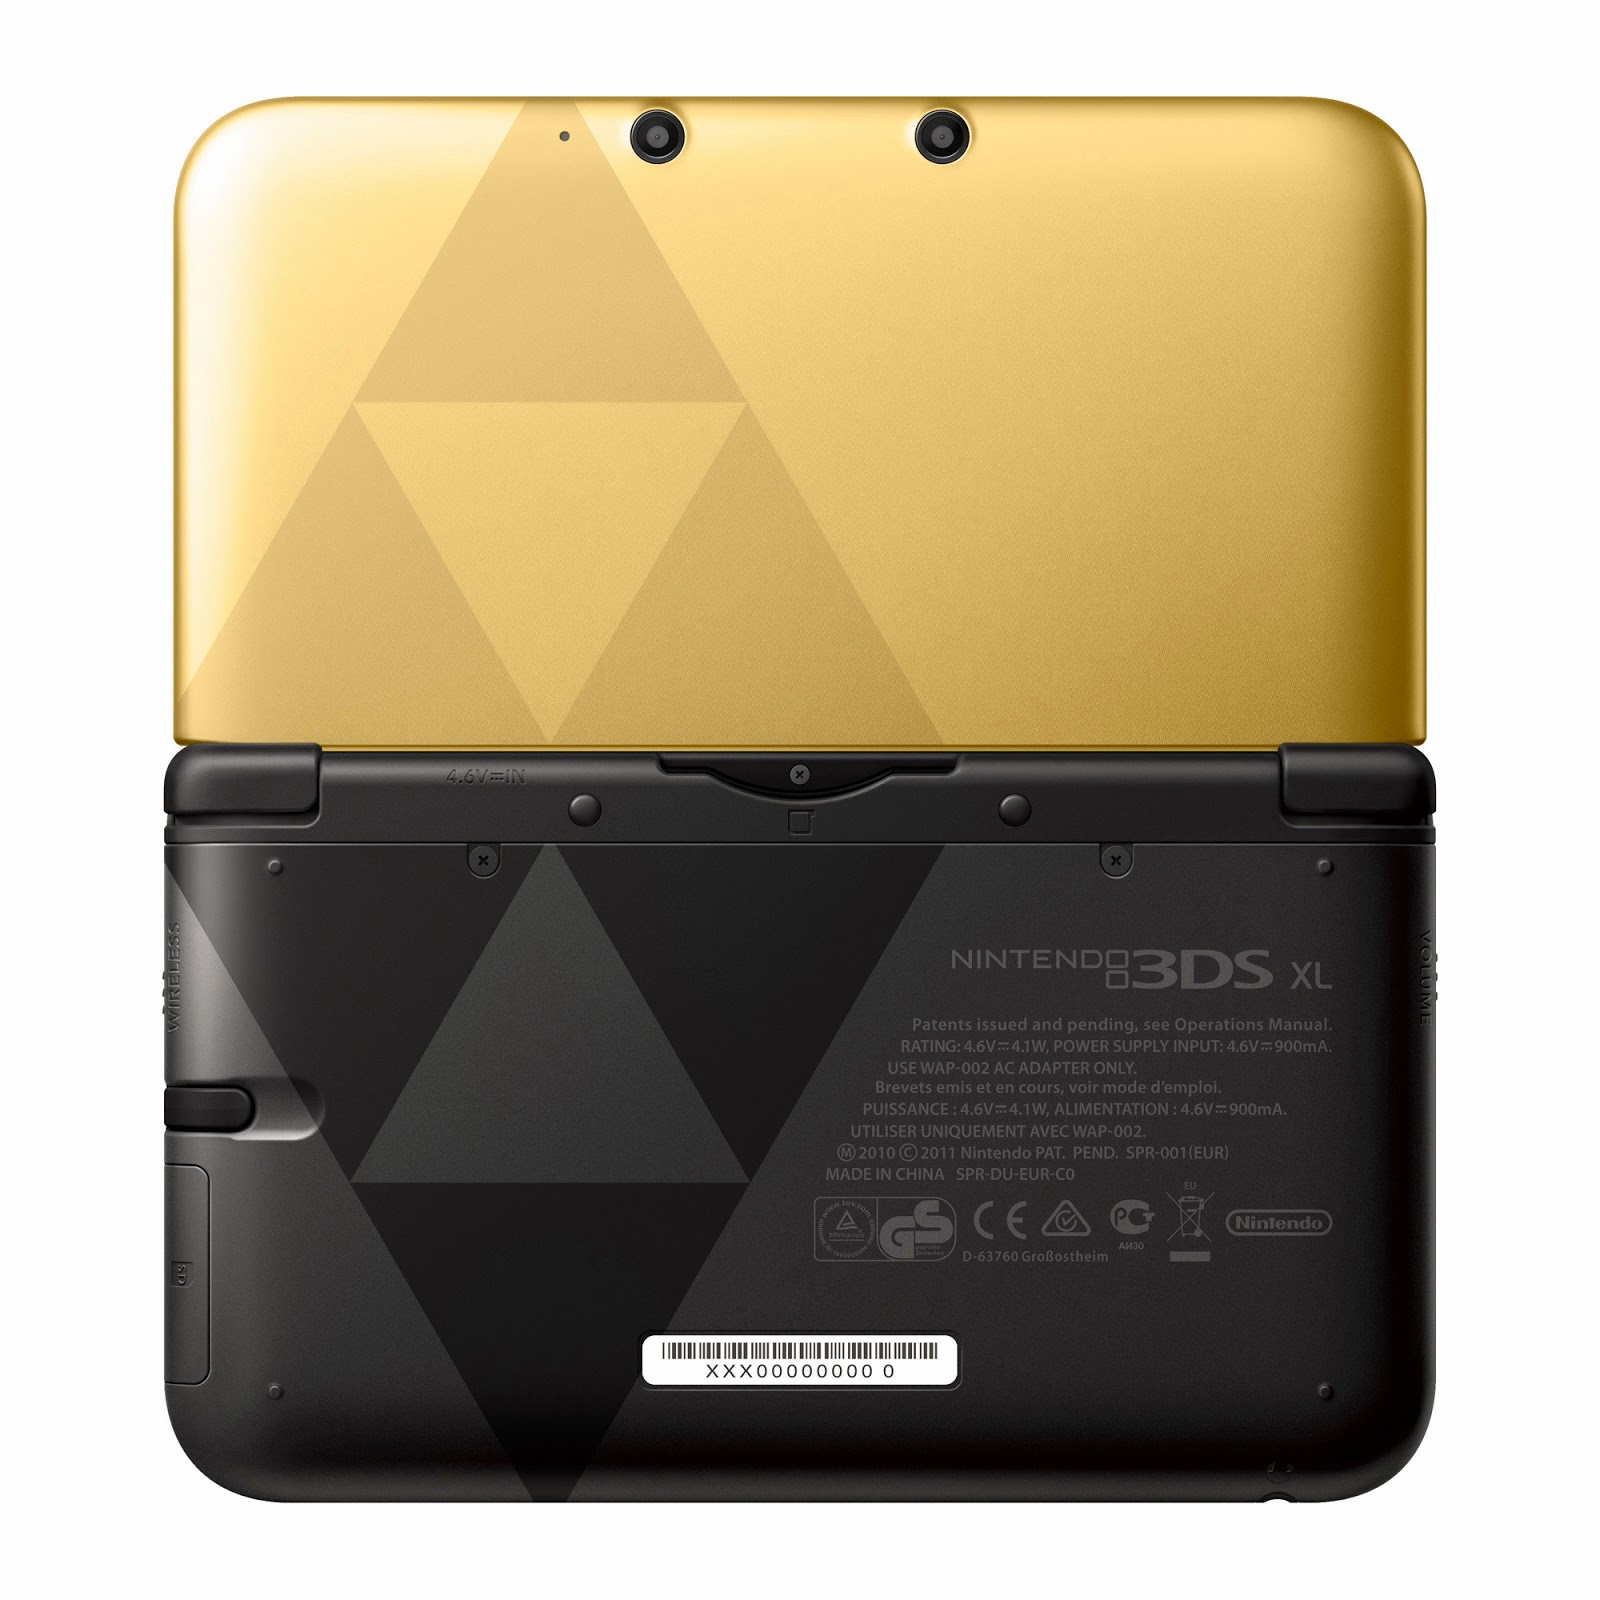 Zelda A Link Between Worlds [Game of the Year] Prices Nintendo 3DS